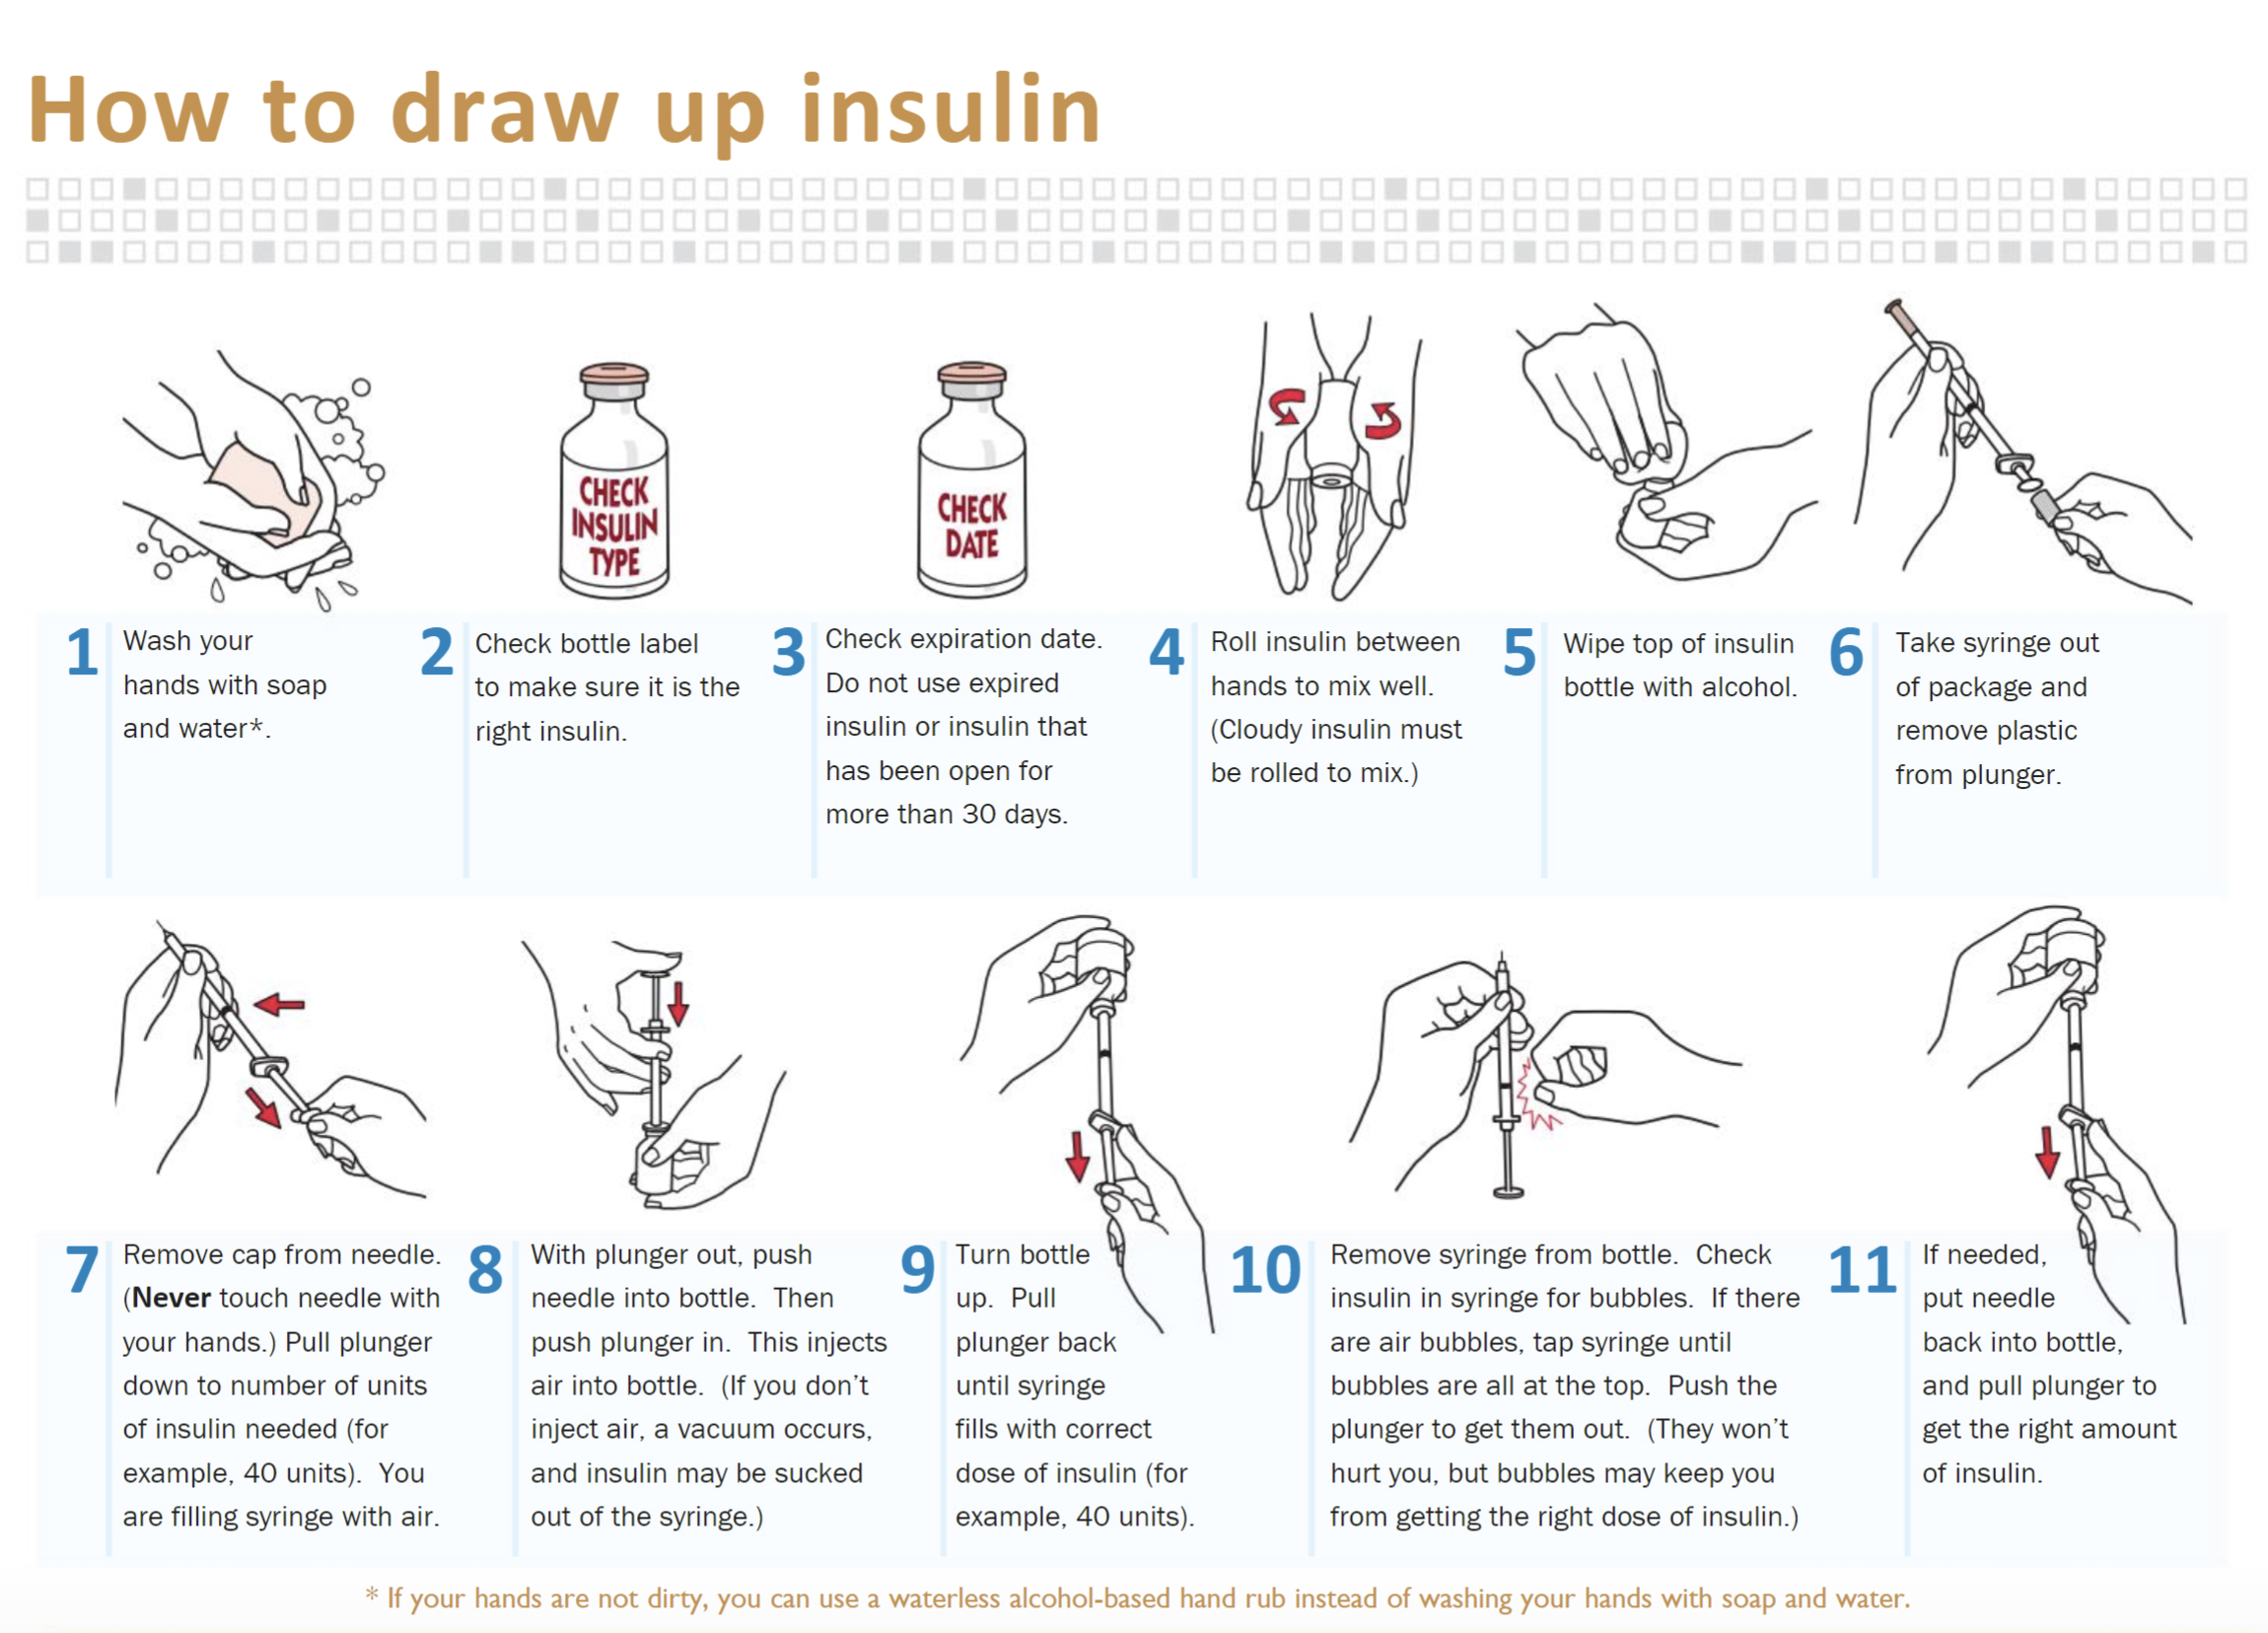 Drawing up insulin